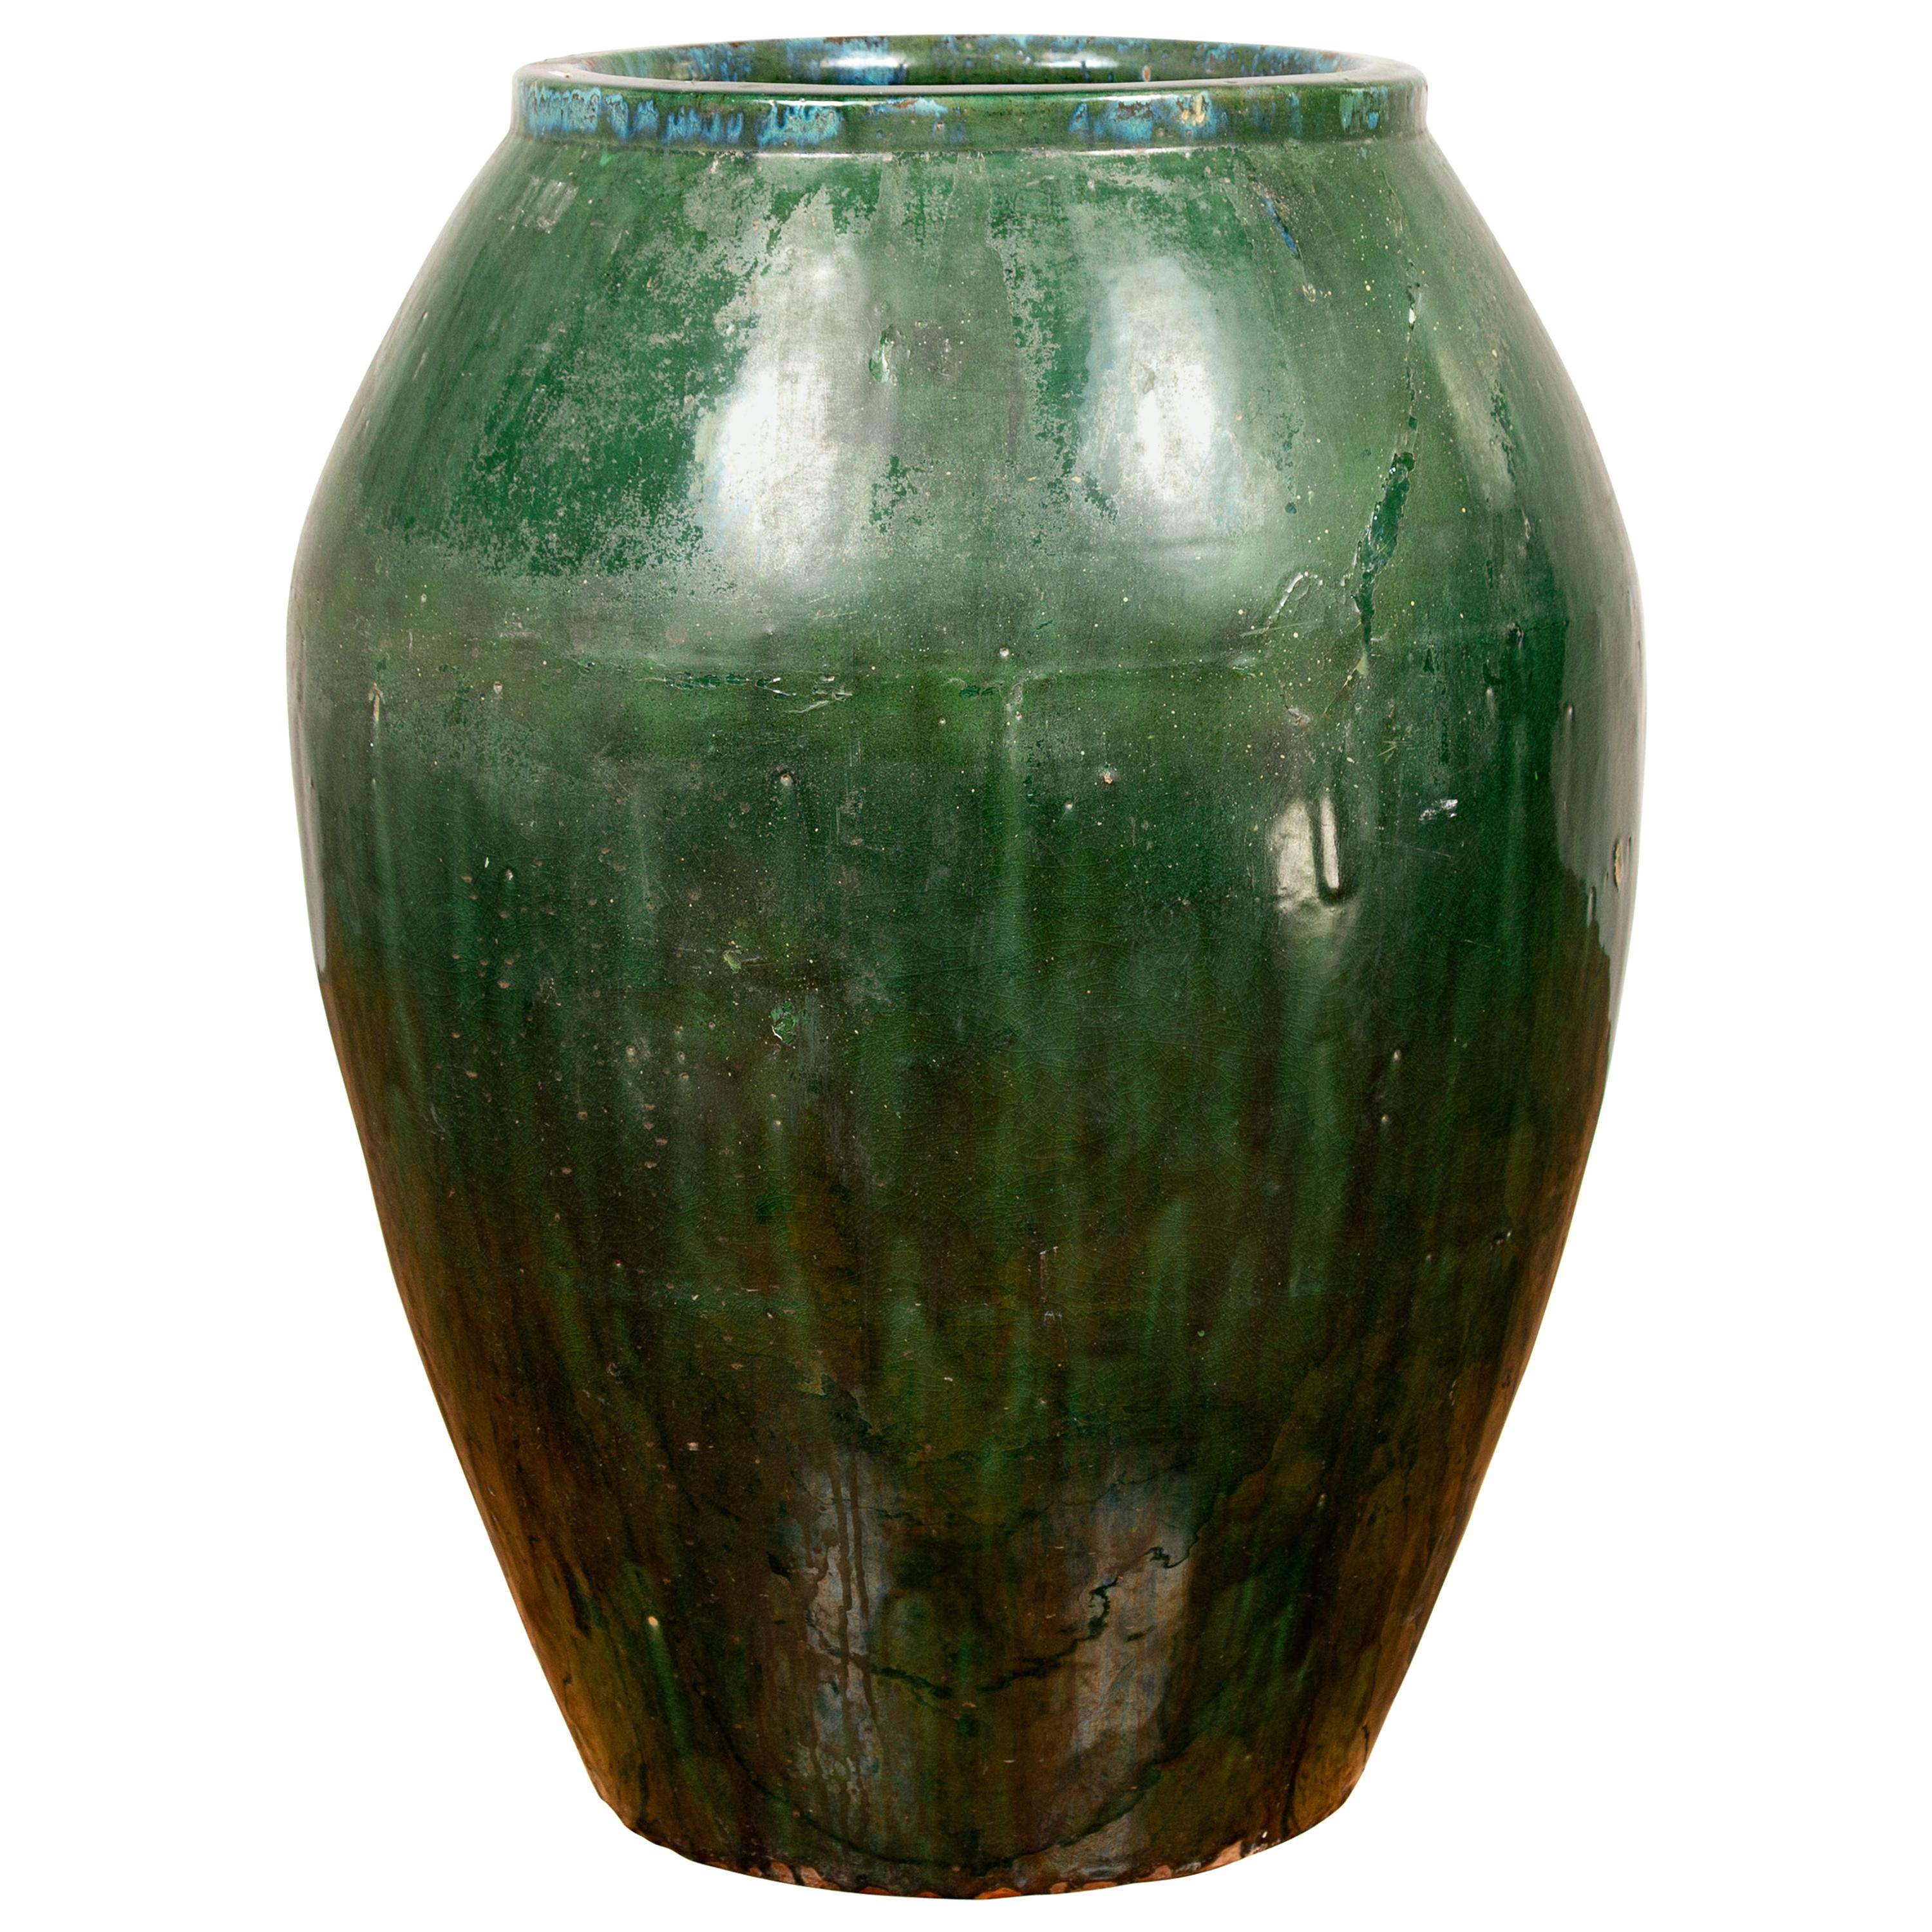 Large Green Glazed Ceramic Jar from the Early 20th Century with Tapering Body